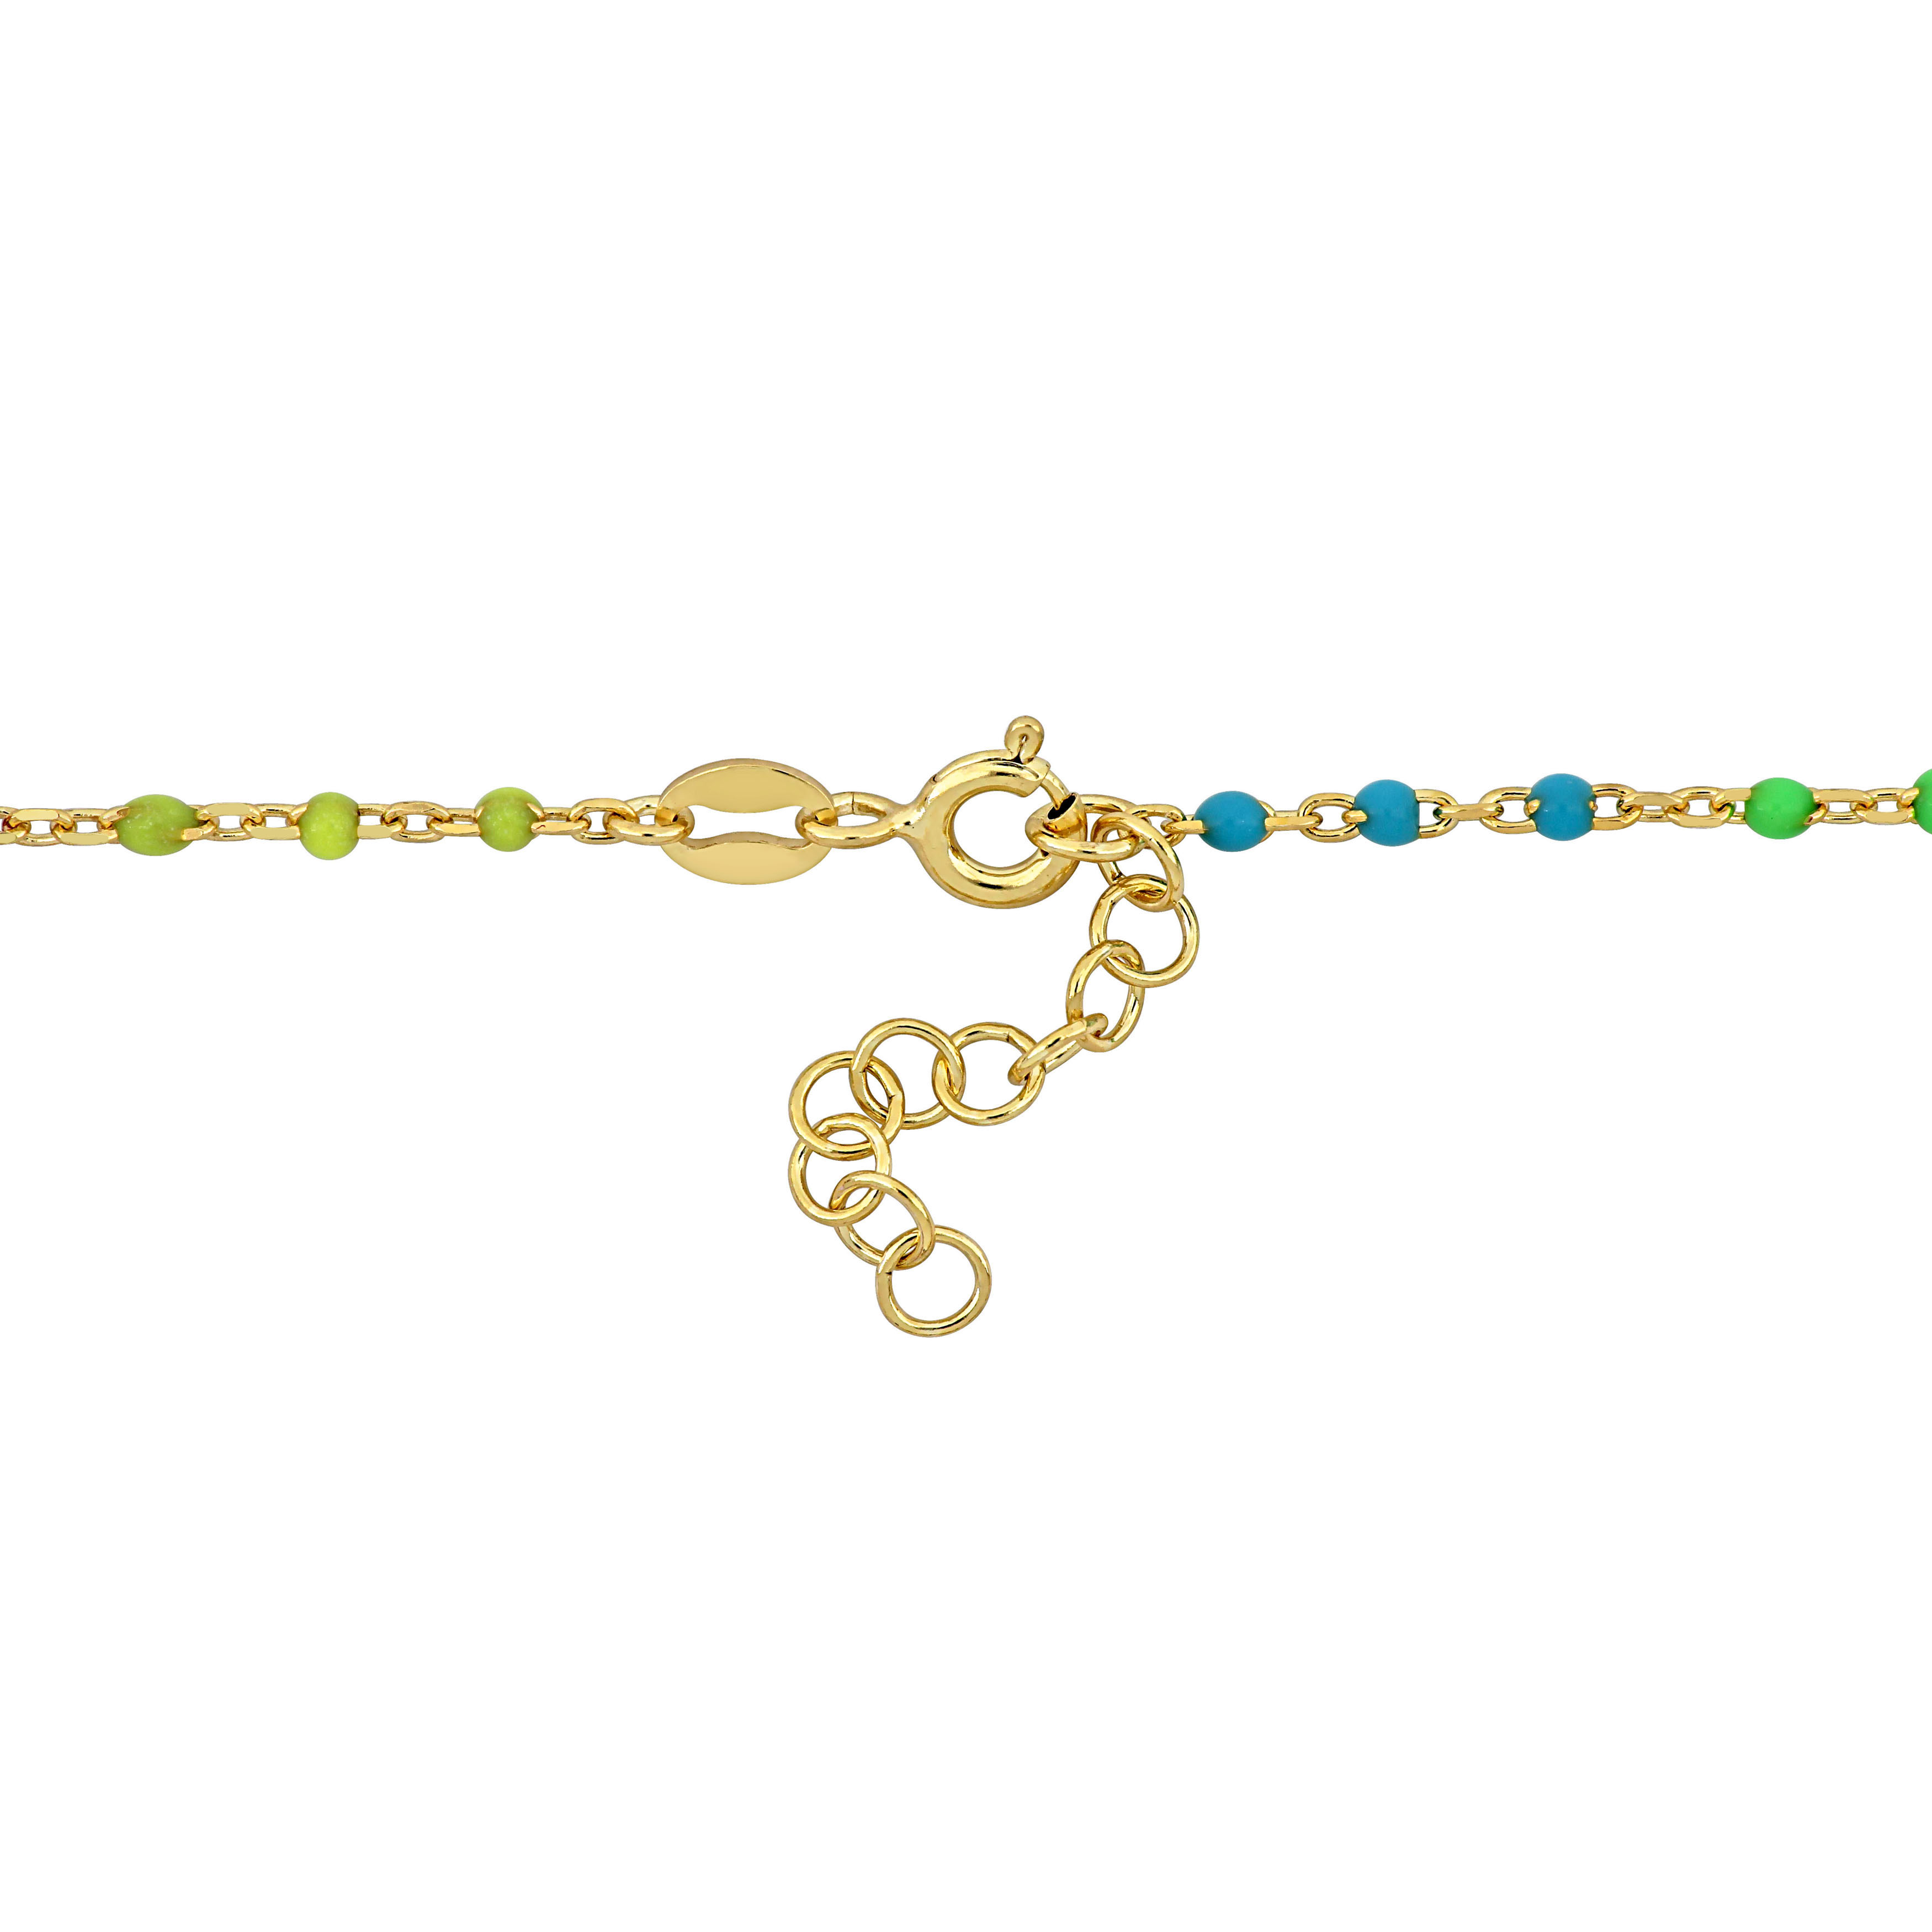 Multi-color Enamel LOVE and Heart Charm Bracelet in Yellow Plated Sterling Silver - 6.5+1 in.